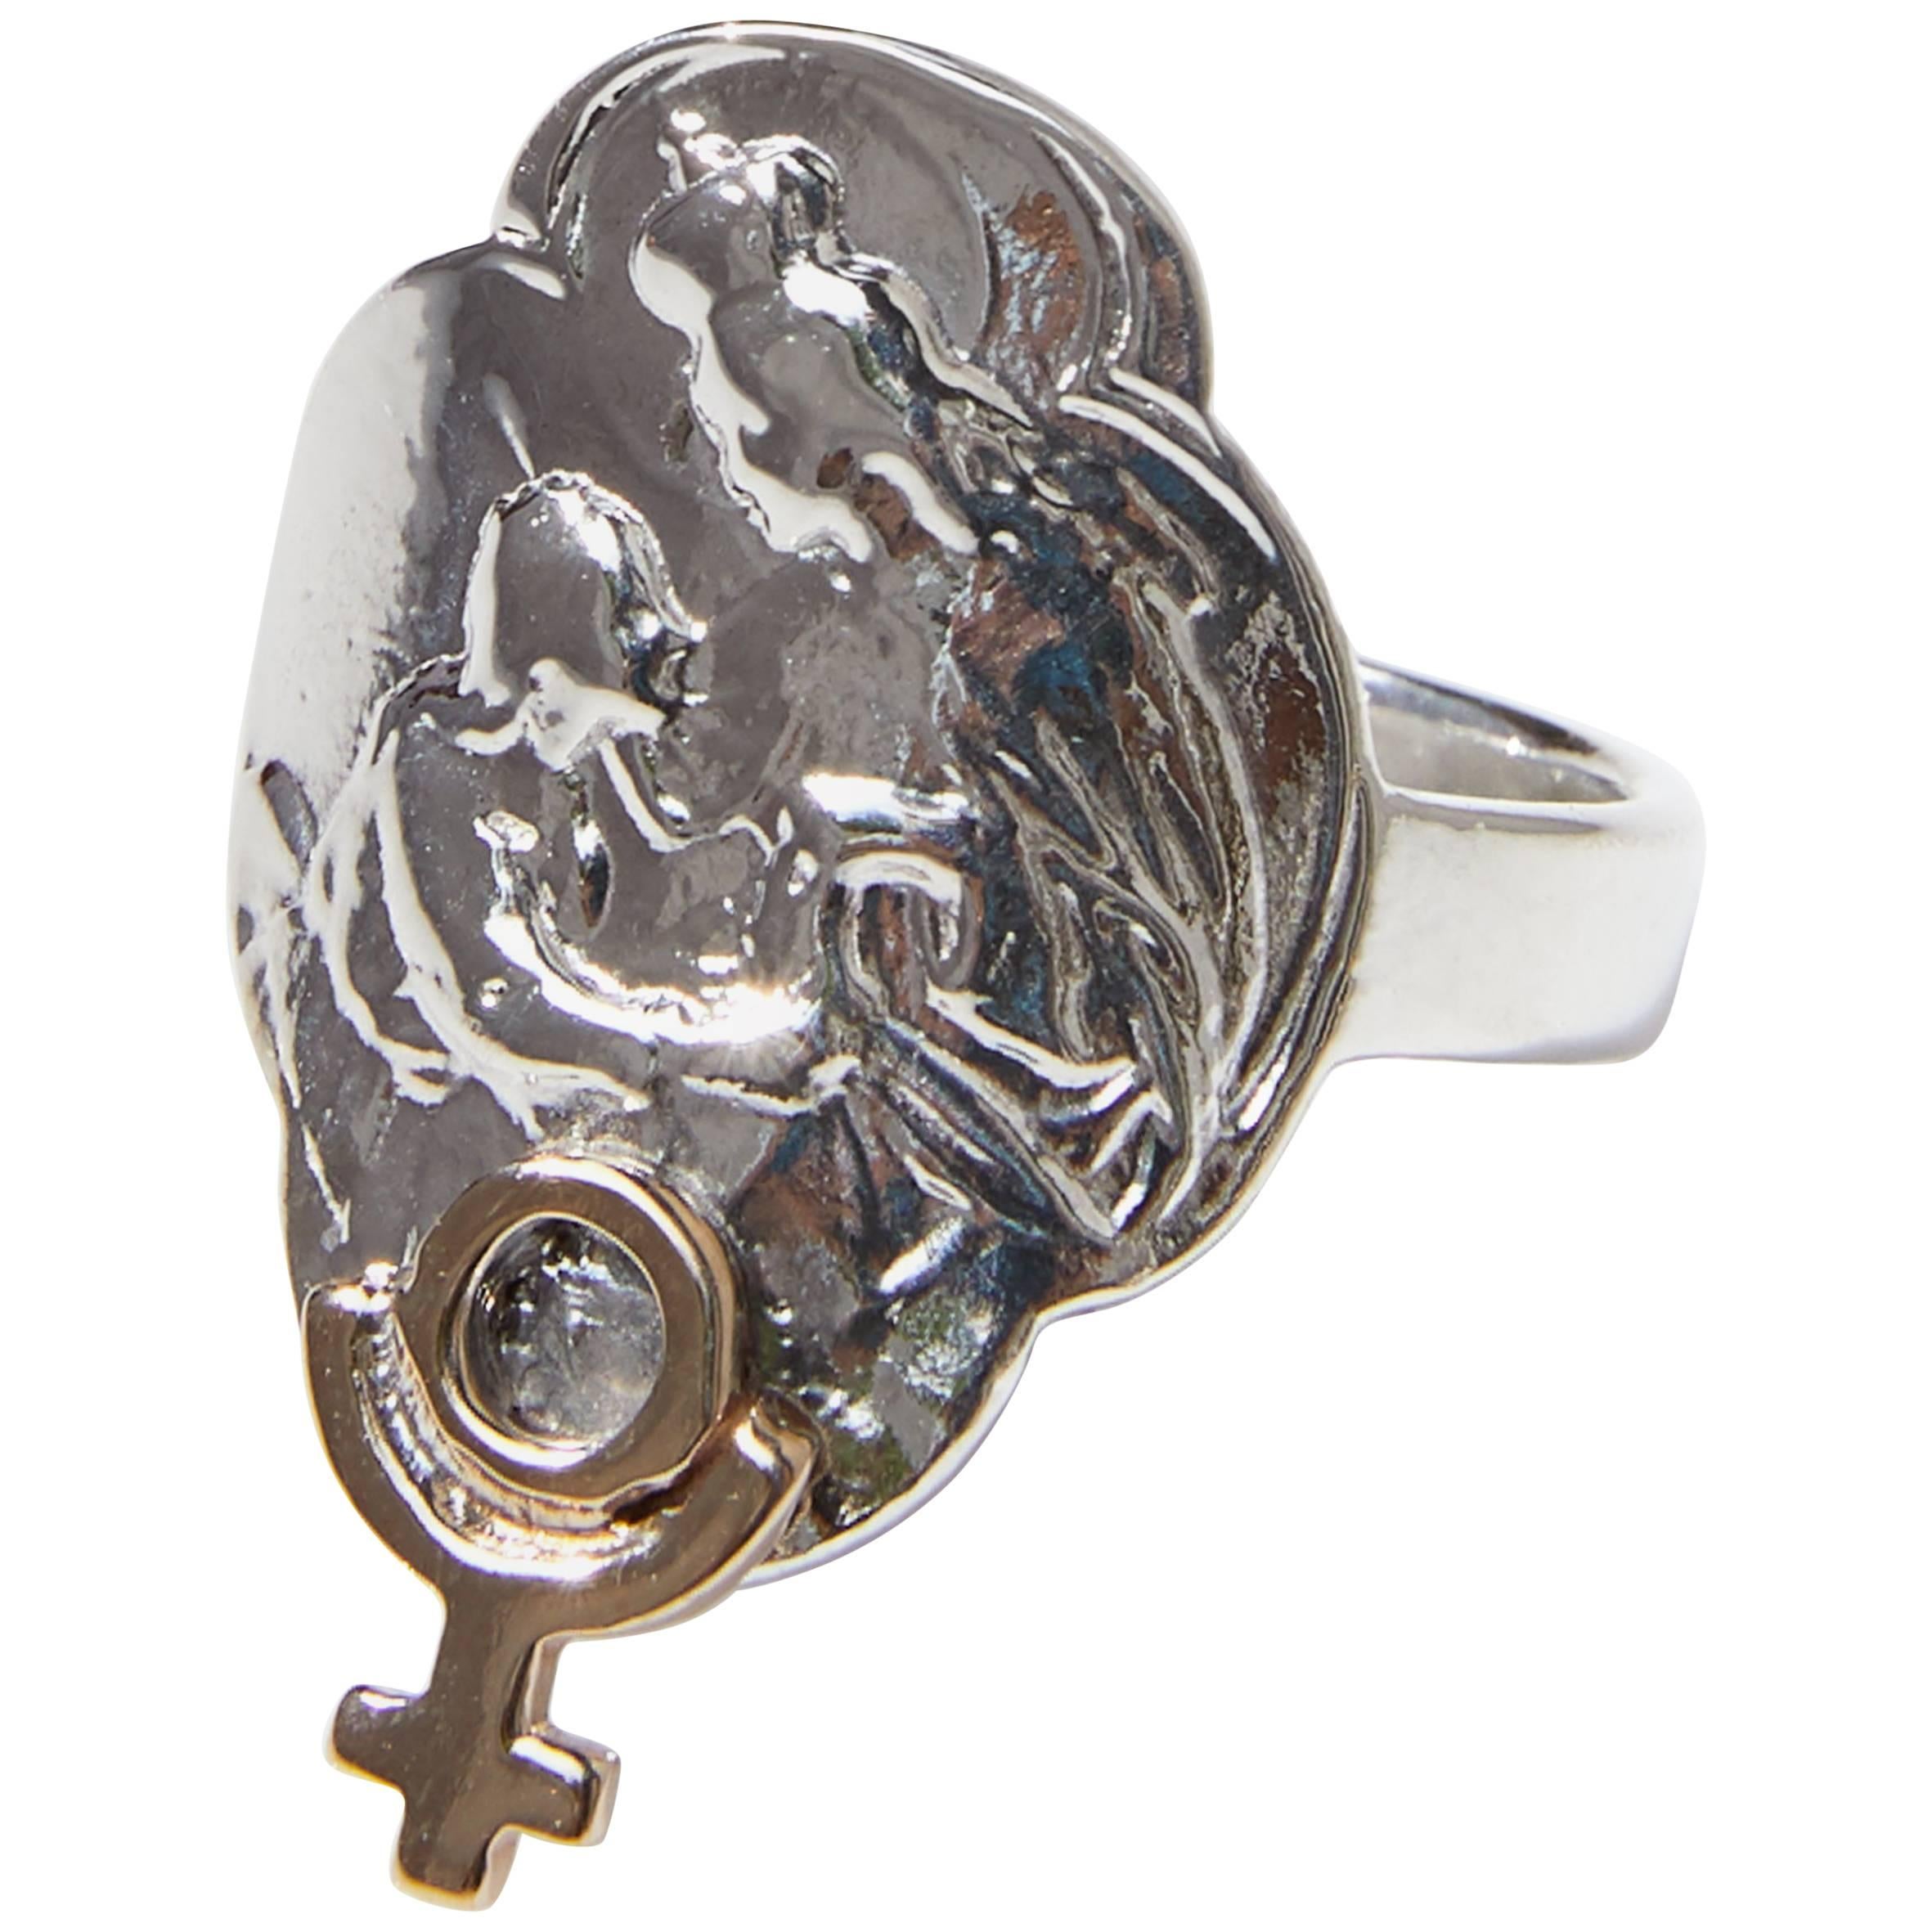 Virgin Mary Crest Ring Sterling Silver Gold Pluto Symbol Astrology J Dauphin

J DAUPHIN 